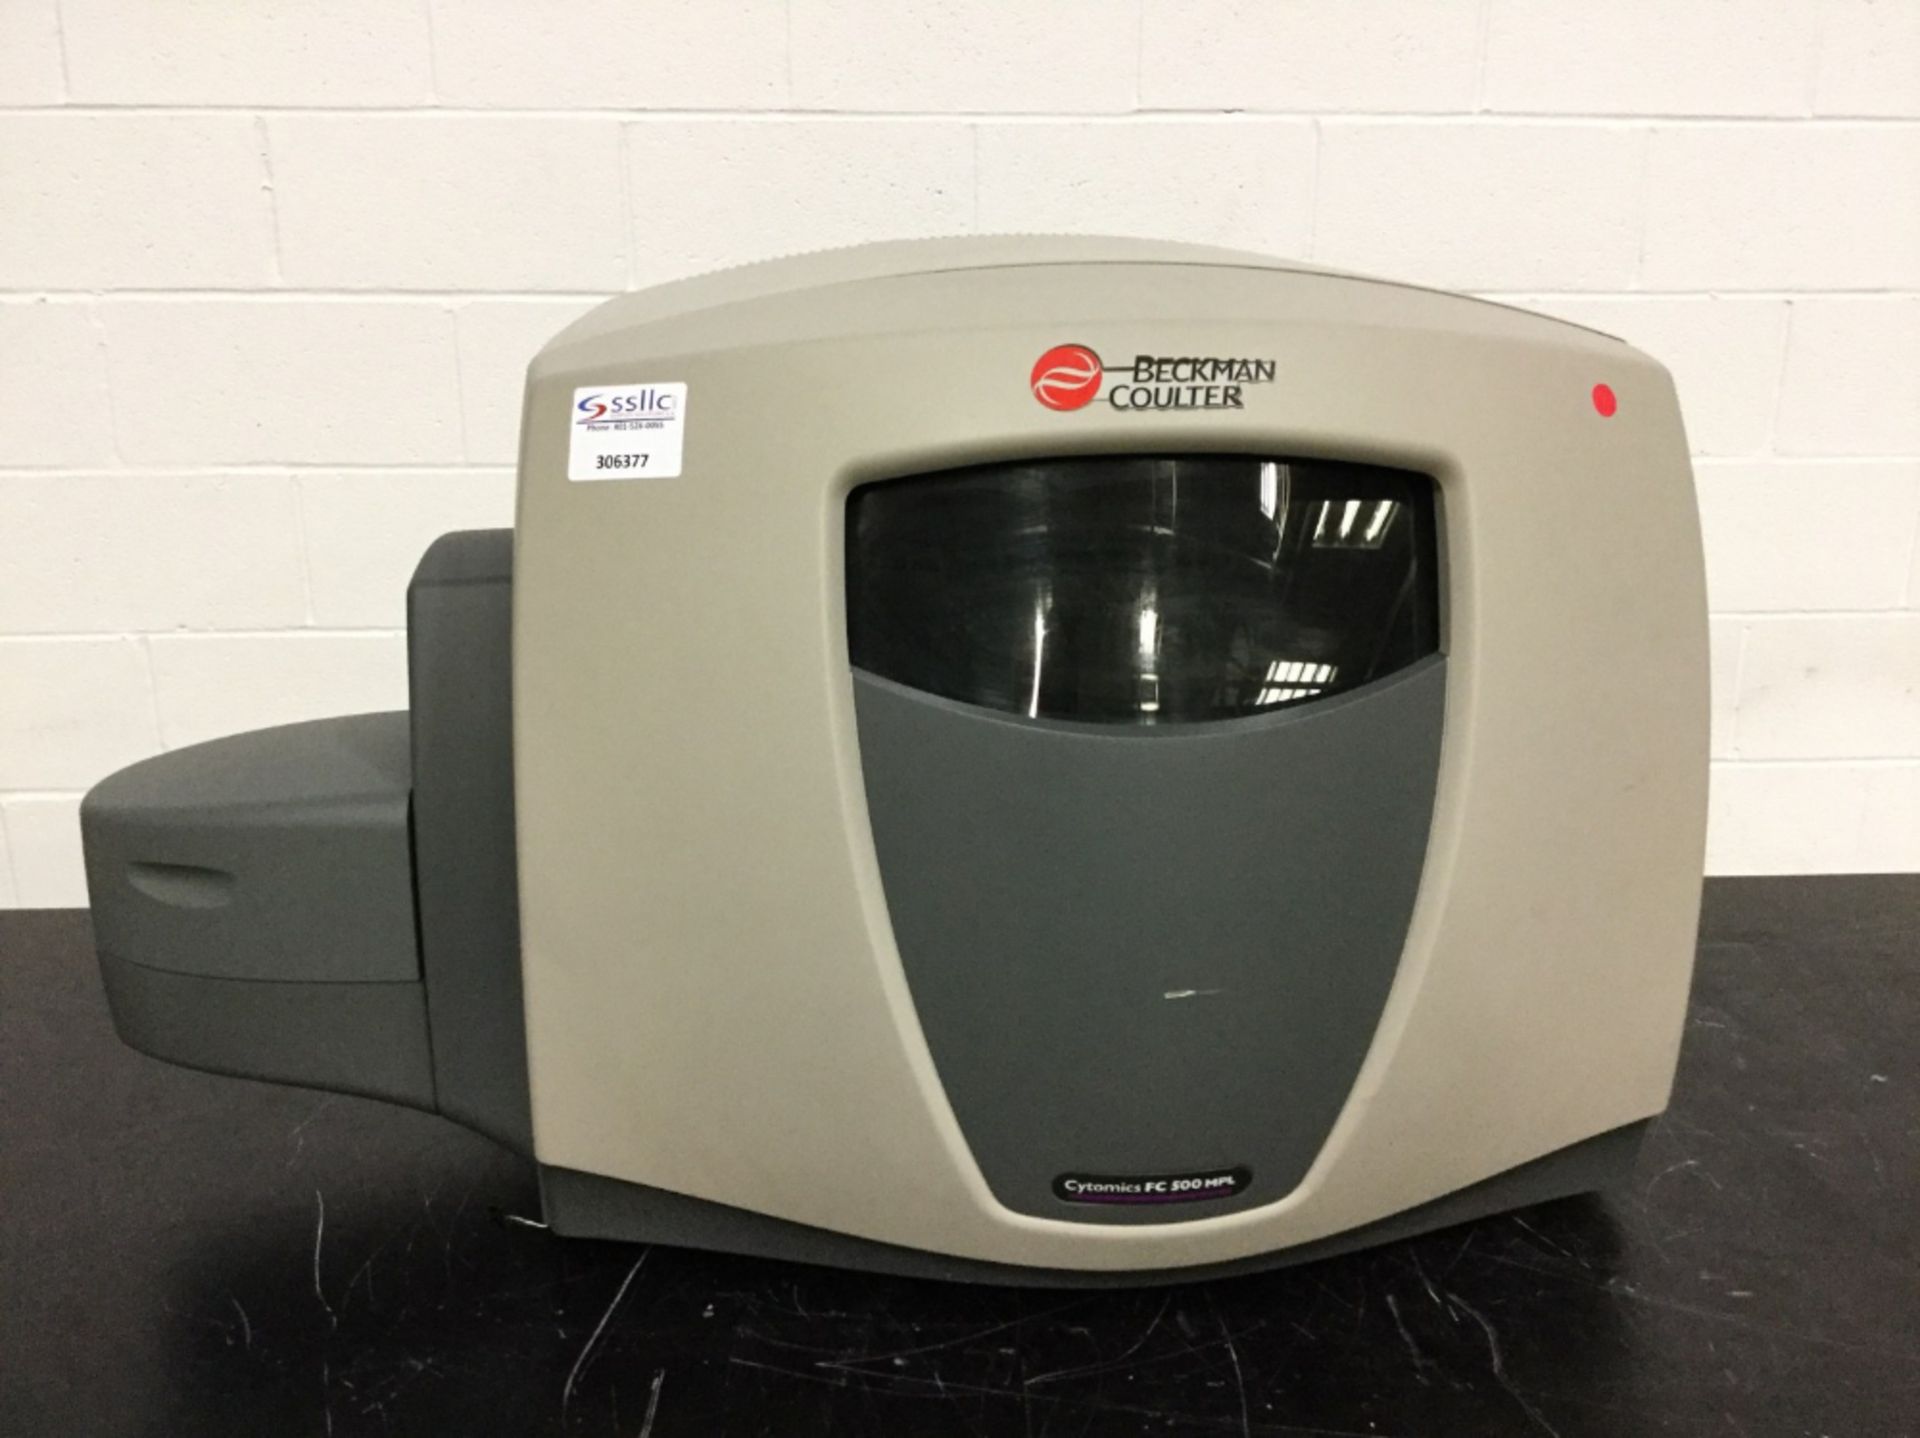 Beckman Coulter Cytomics FC 500 MPL Flow Cytometer